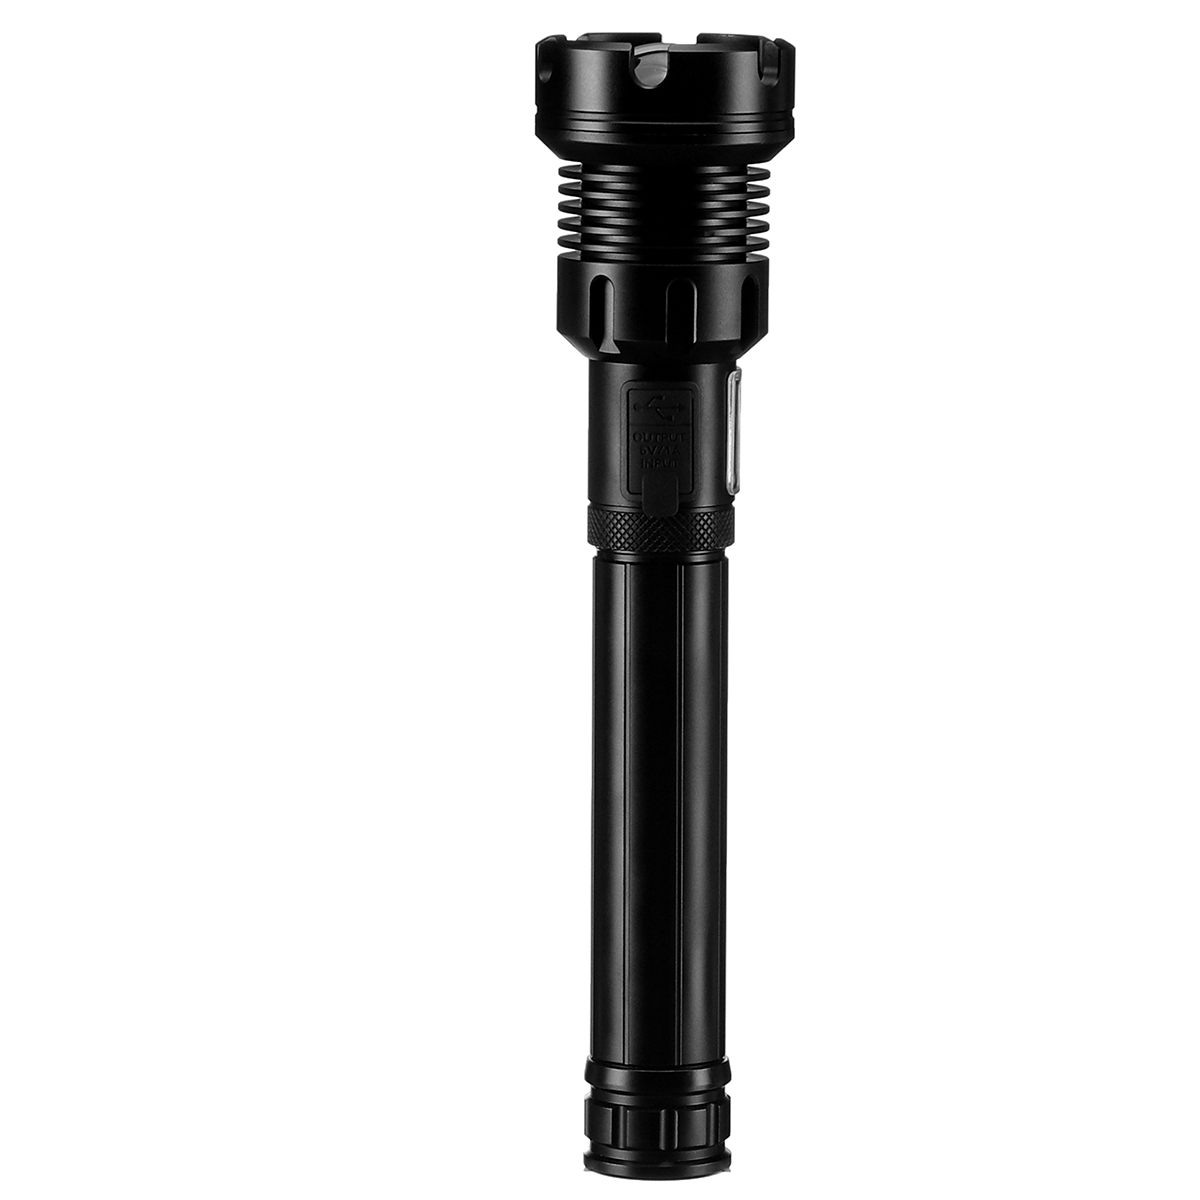 Find Super Powerfull P90 LED Flashlight With Side Light Outdoor Waterproof Torch for Sale on Gipsybee.com with cryptocurrencies